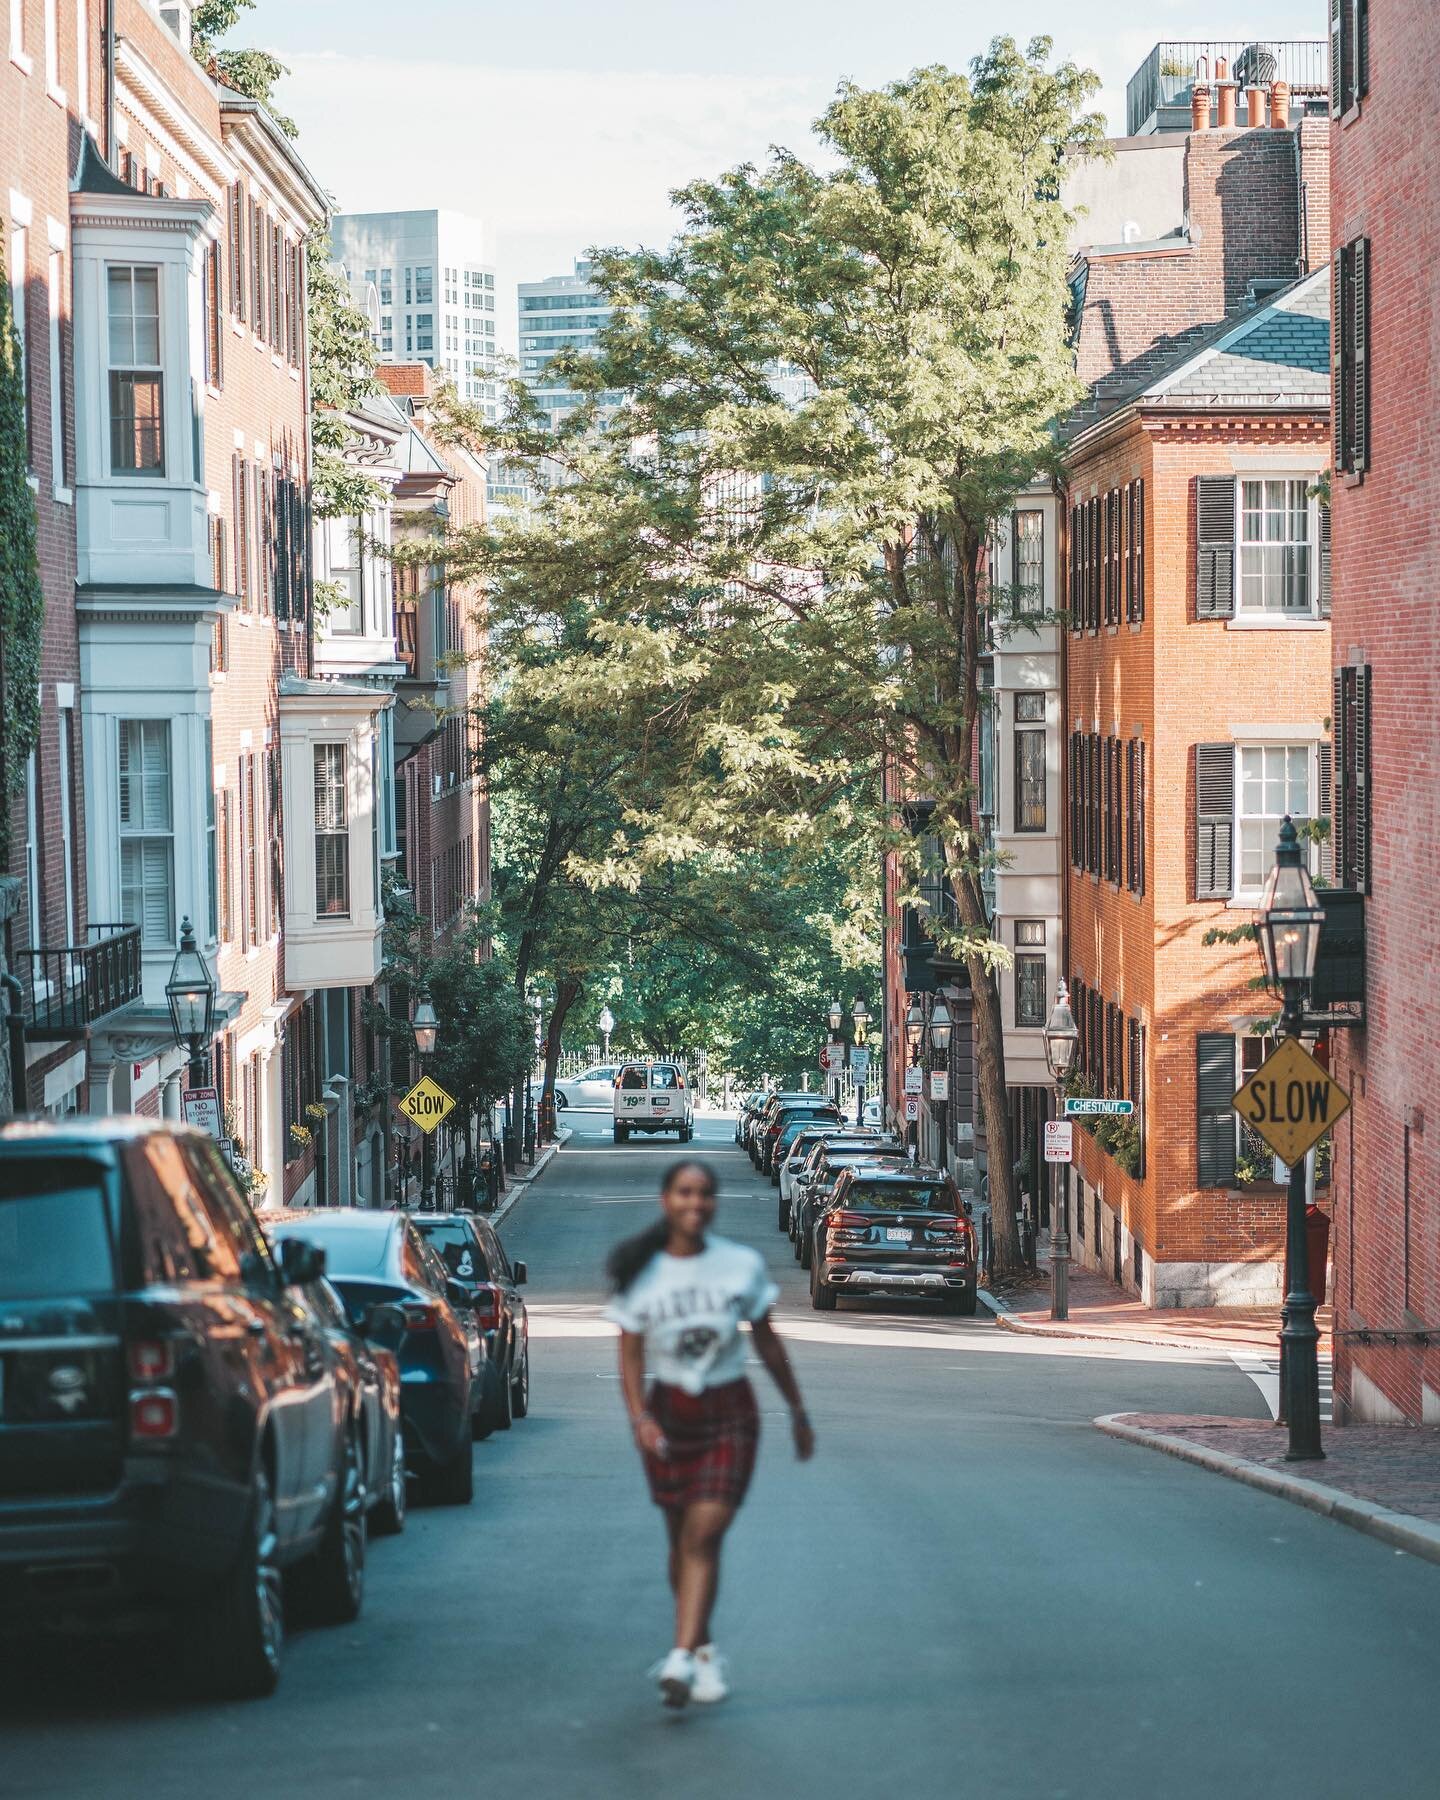 [Save this post] One of the most Instagrammable parts of Boston? Beacon Hill. 

As one of the oldest neighborhoods in the post-colonial United States, Beacon Hill looks like something straight out Europe. There&rsquo;s a sense of enchantment as one w